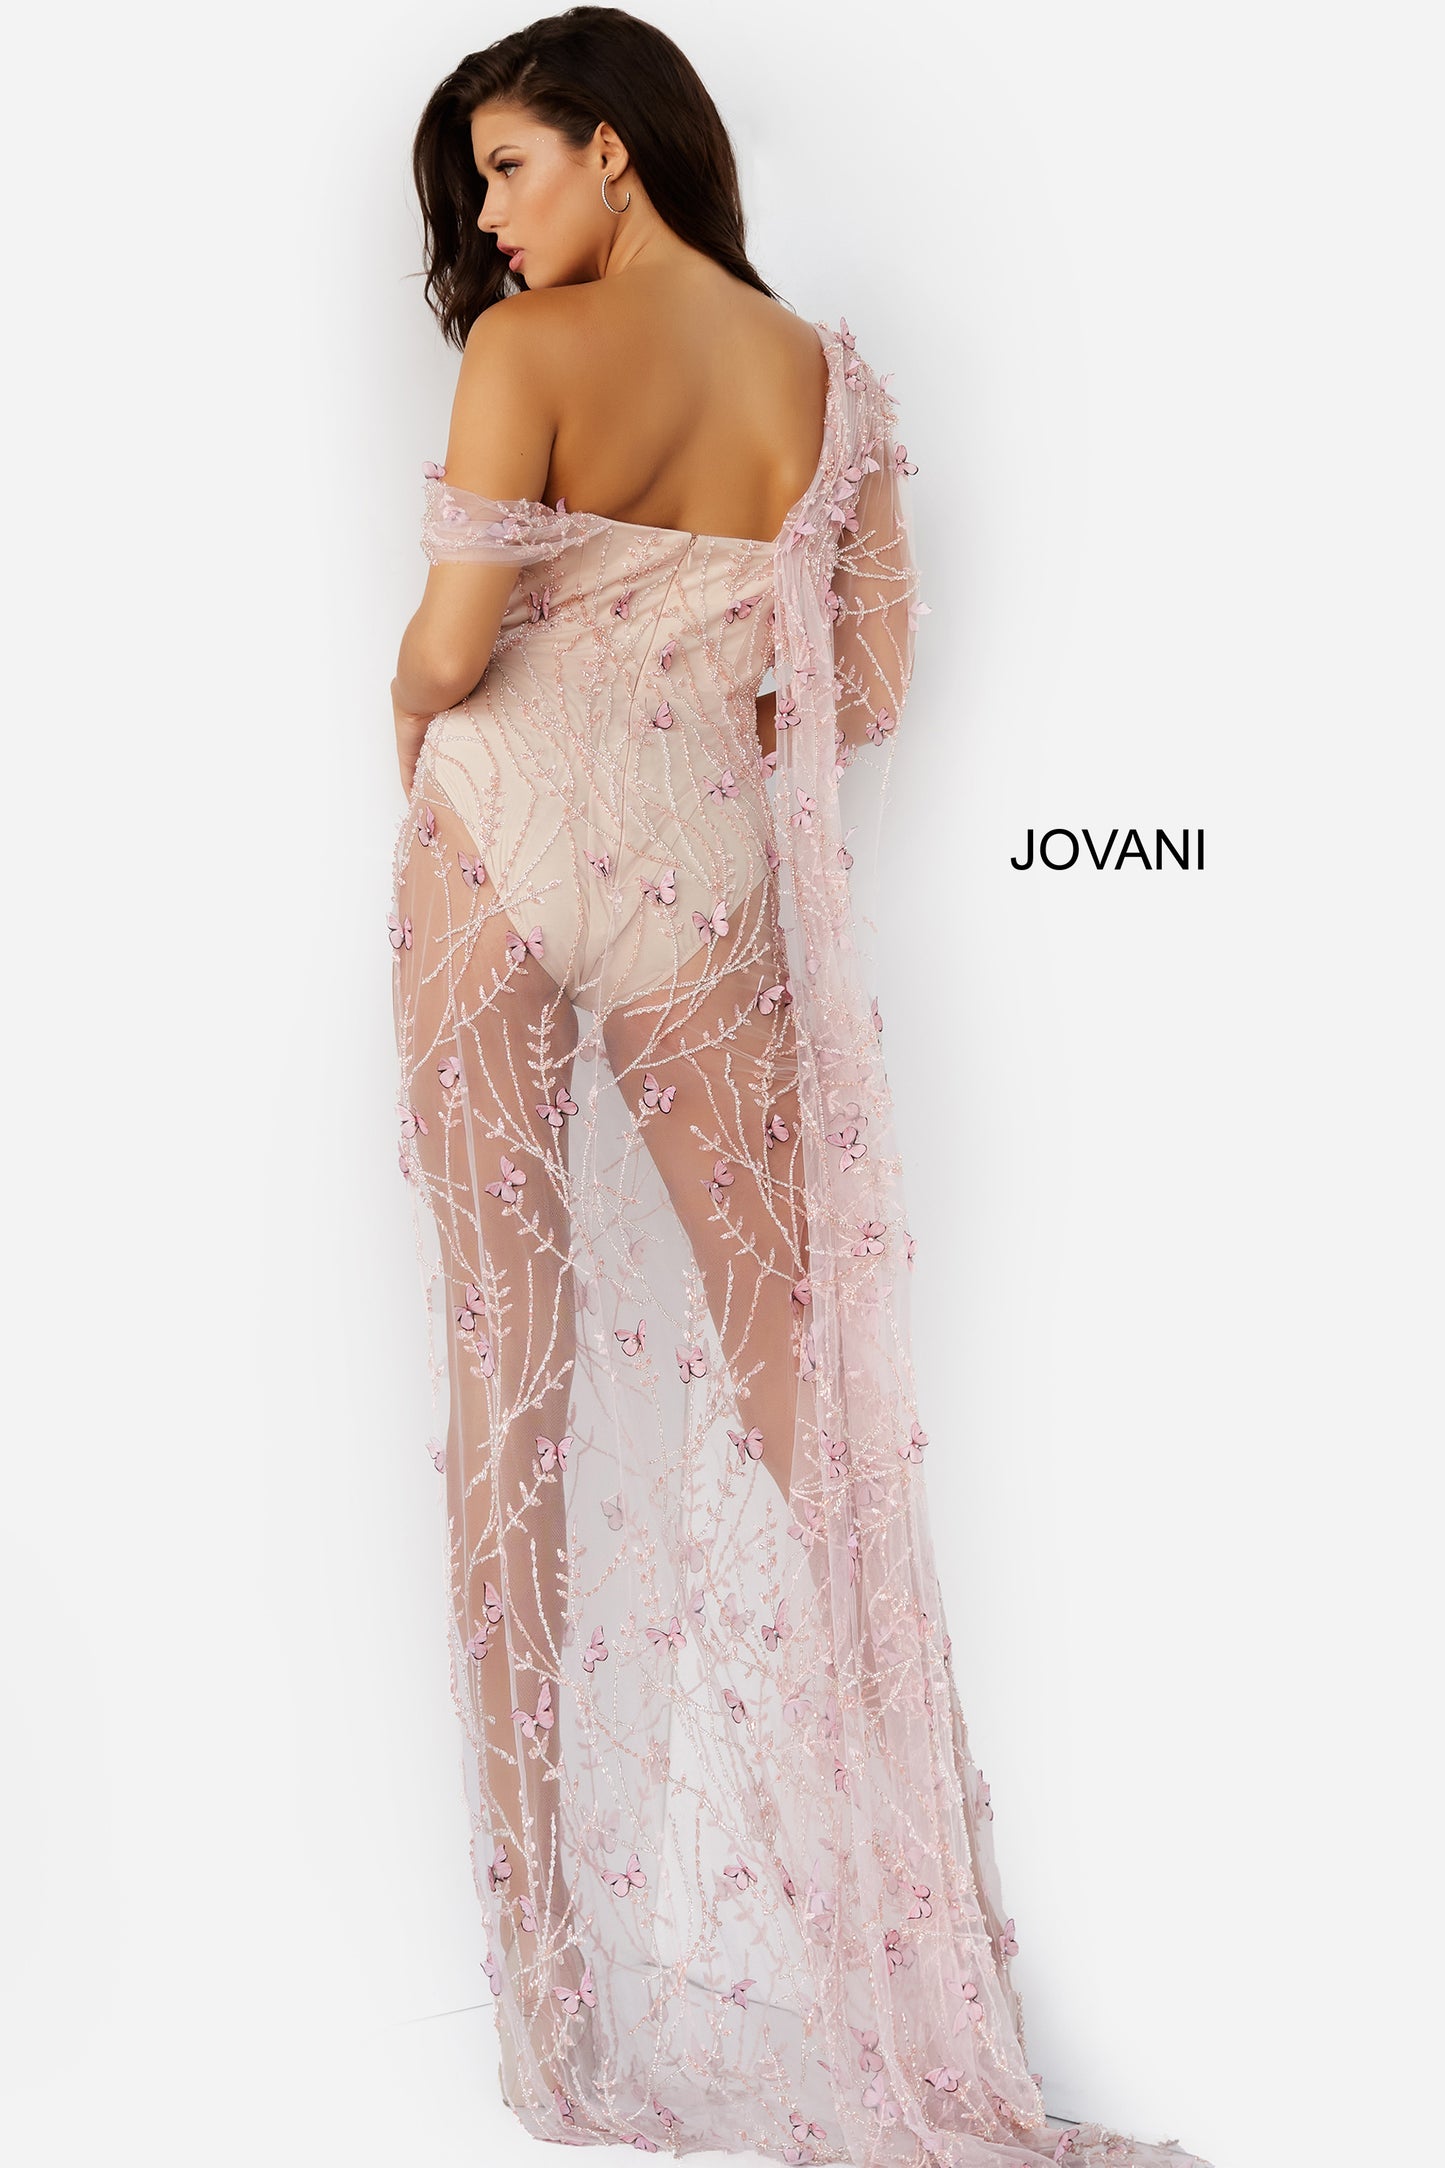 Jovani 06513 Long Straight Sheer Prom Pageant Gown off the shoulder side slit  Available Size- 00-24  Available Color- Nude/Pink